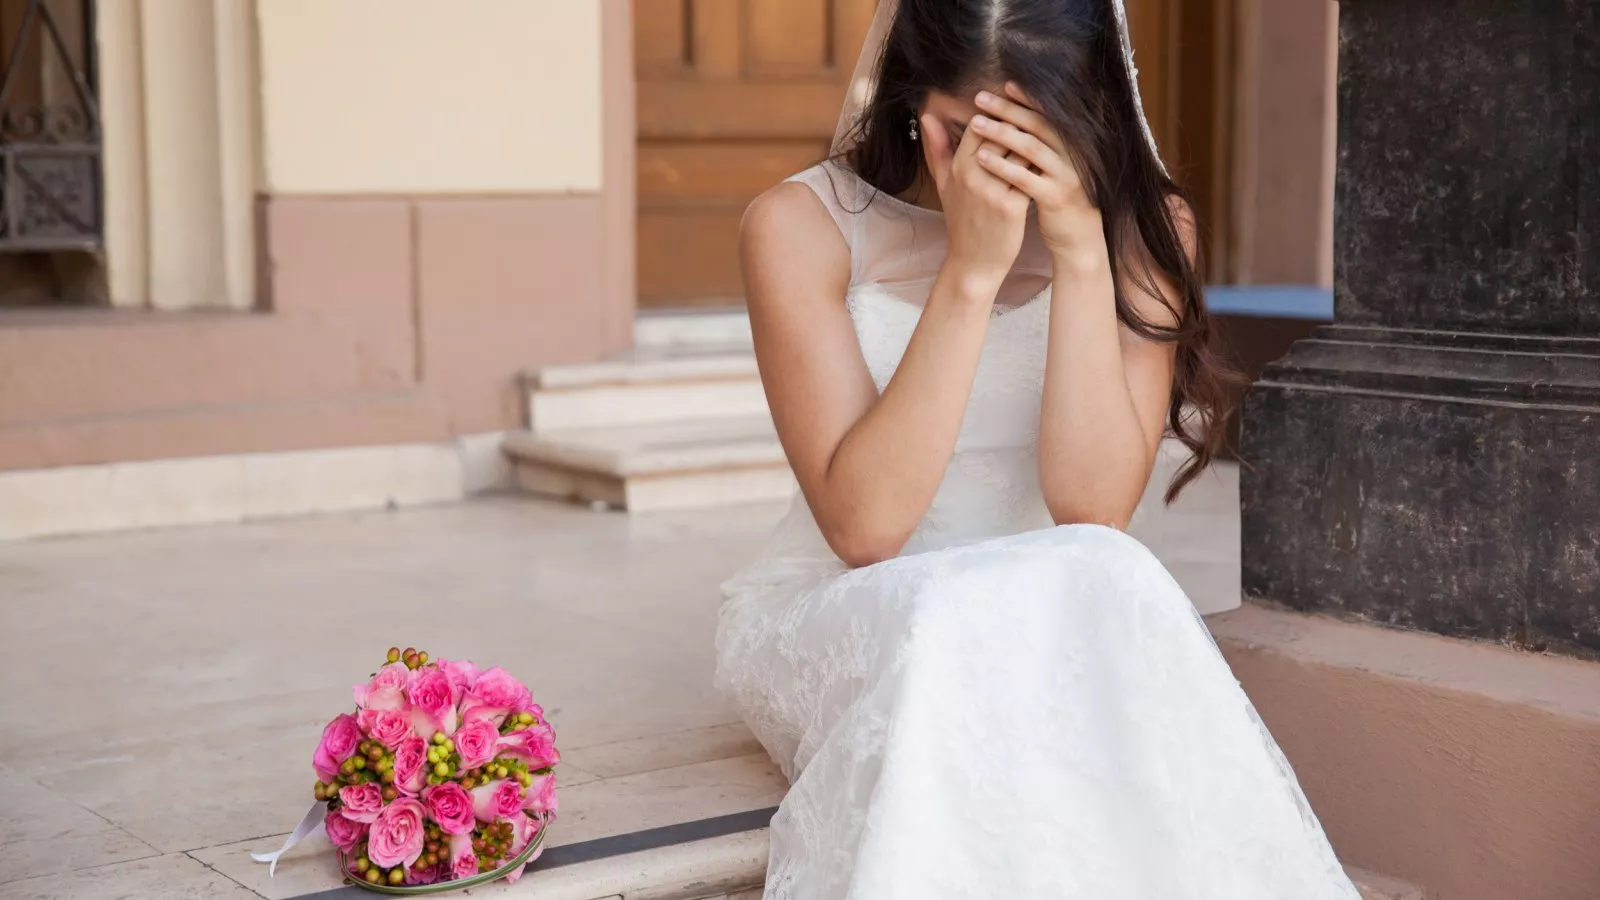 Mom Refusing to Attend Daughter's Wedding If Her Ex Is Invited Splits Views